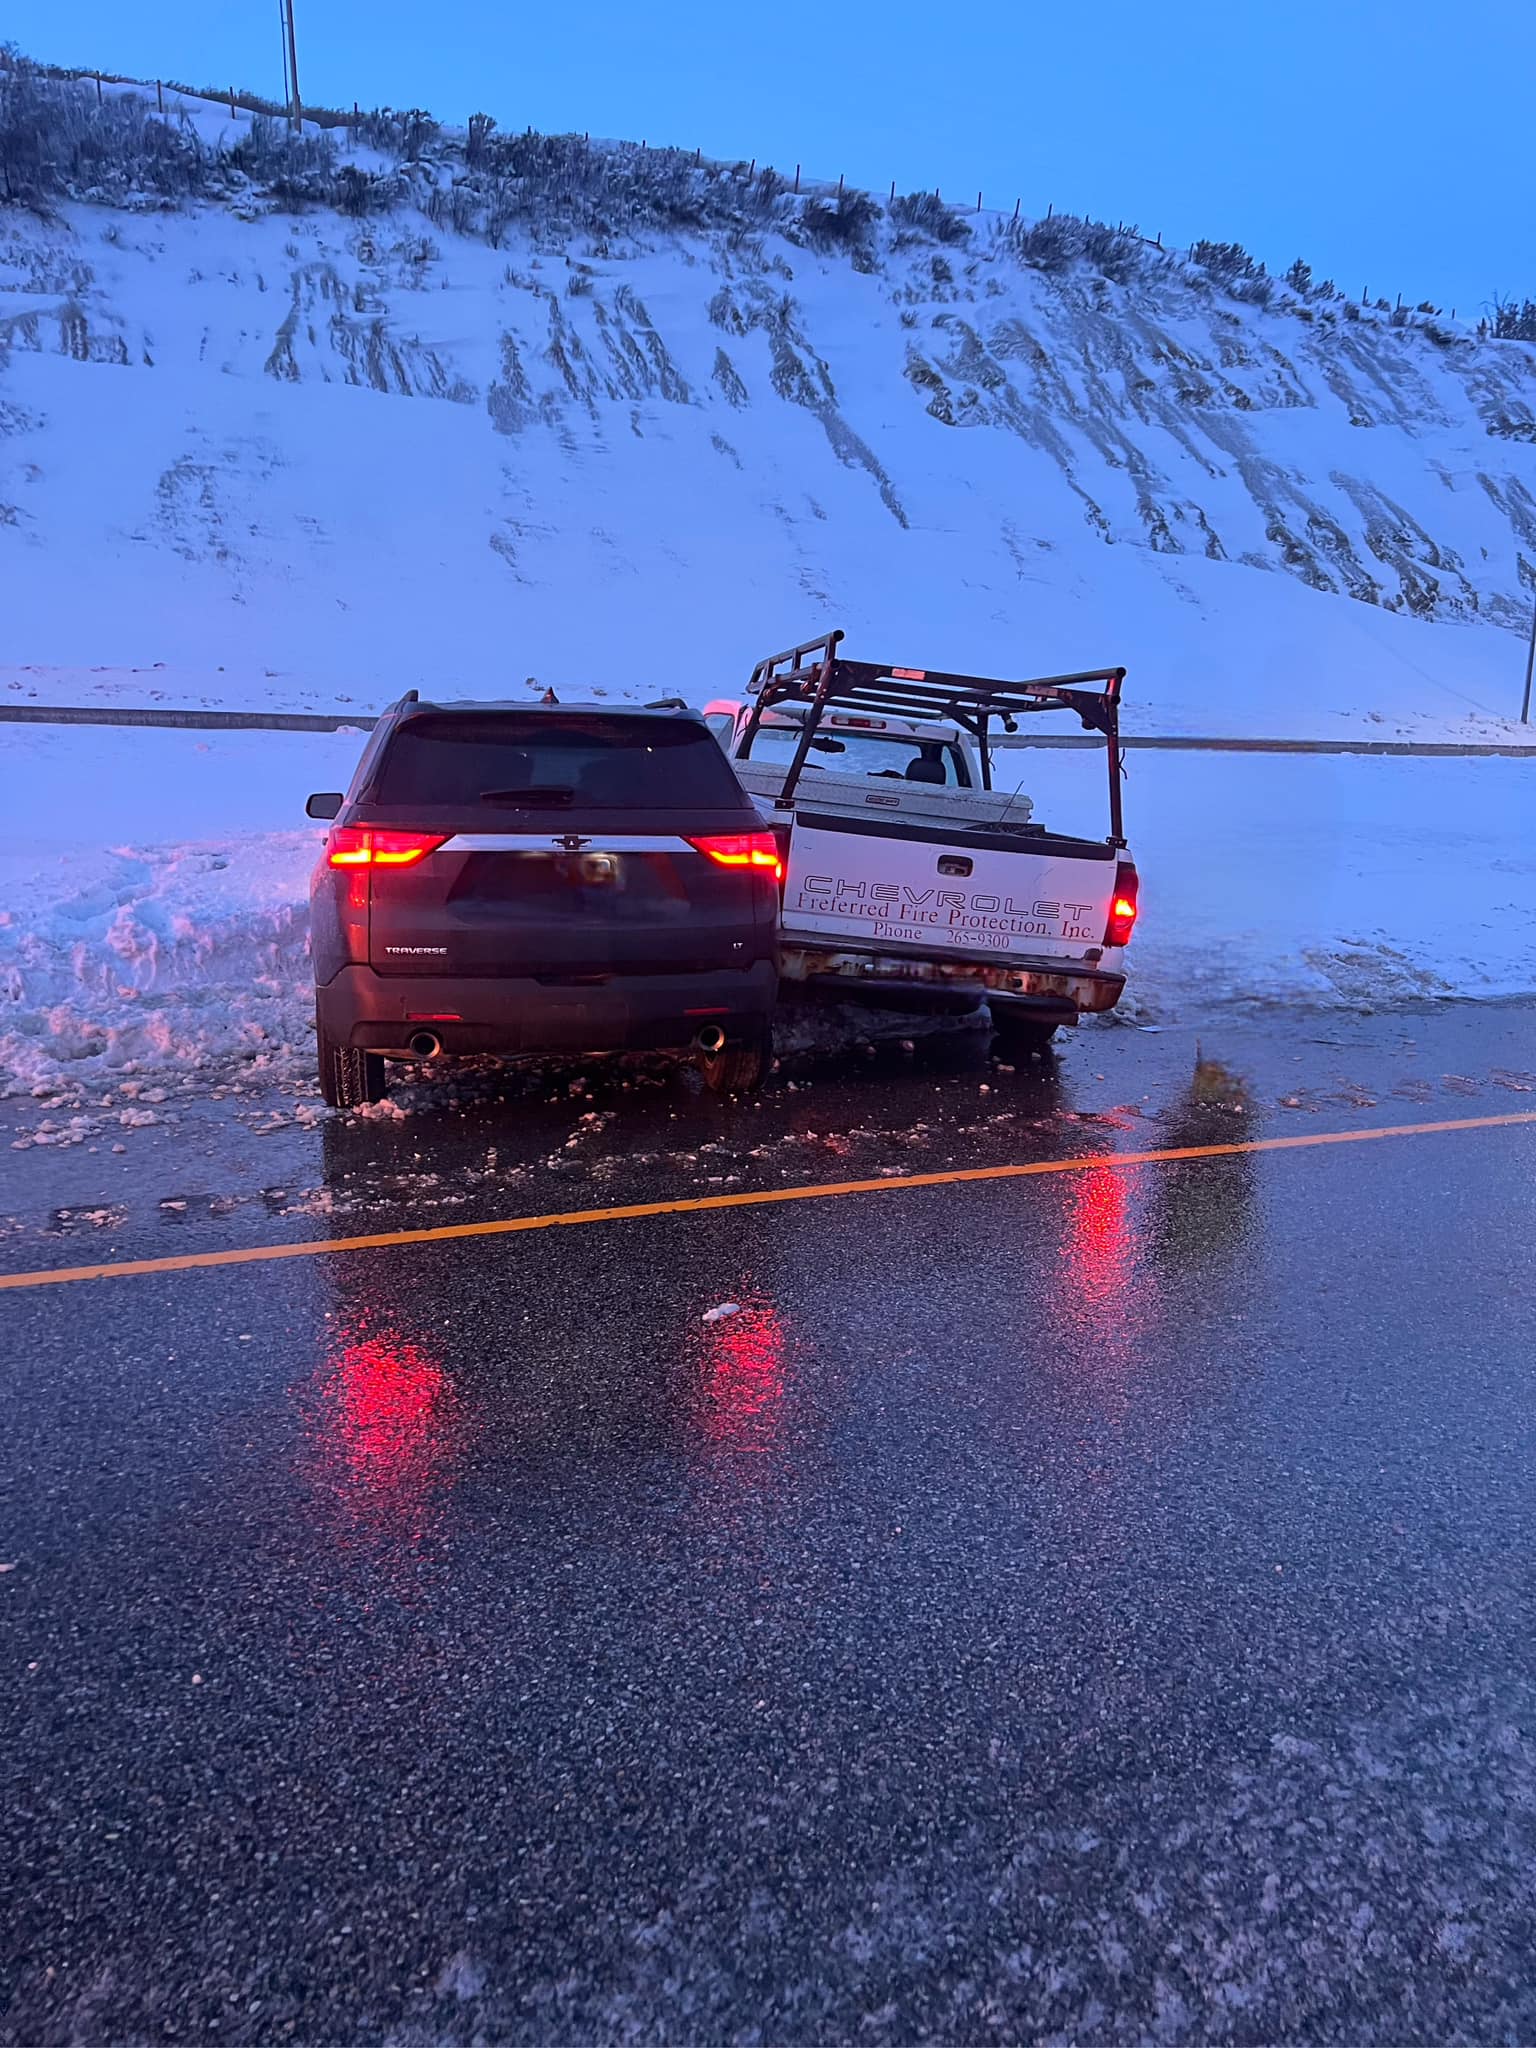 At approximately 7:00 pm March 30 PCFD responded to multiple car accidents just East of mile marker 139 I-80 East bound. This picture was one of 4 accidents. A total of 3 patients were transported to valley hospitals.